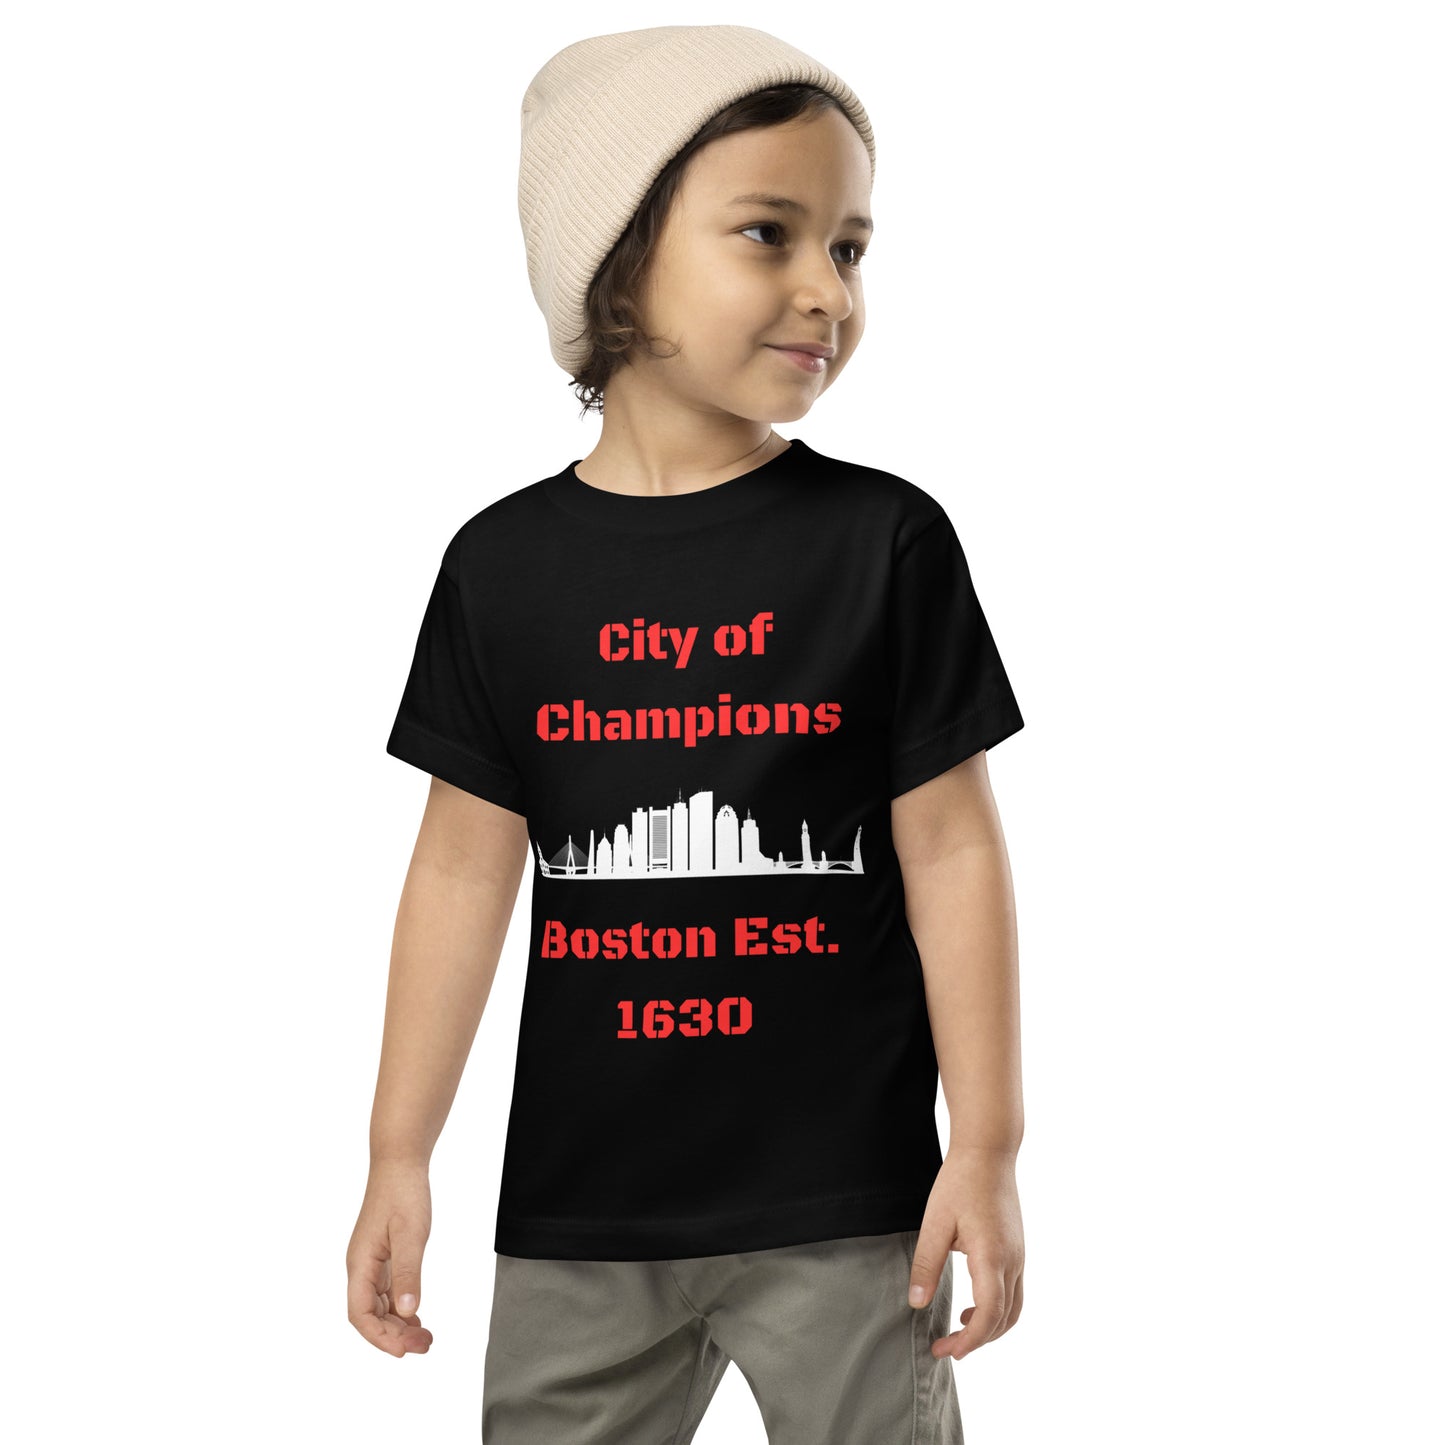 City of Champions Toddler Short Sleeve Tee